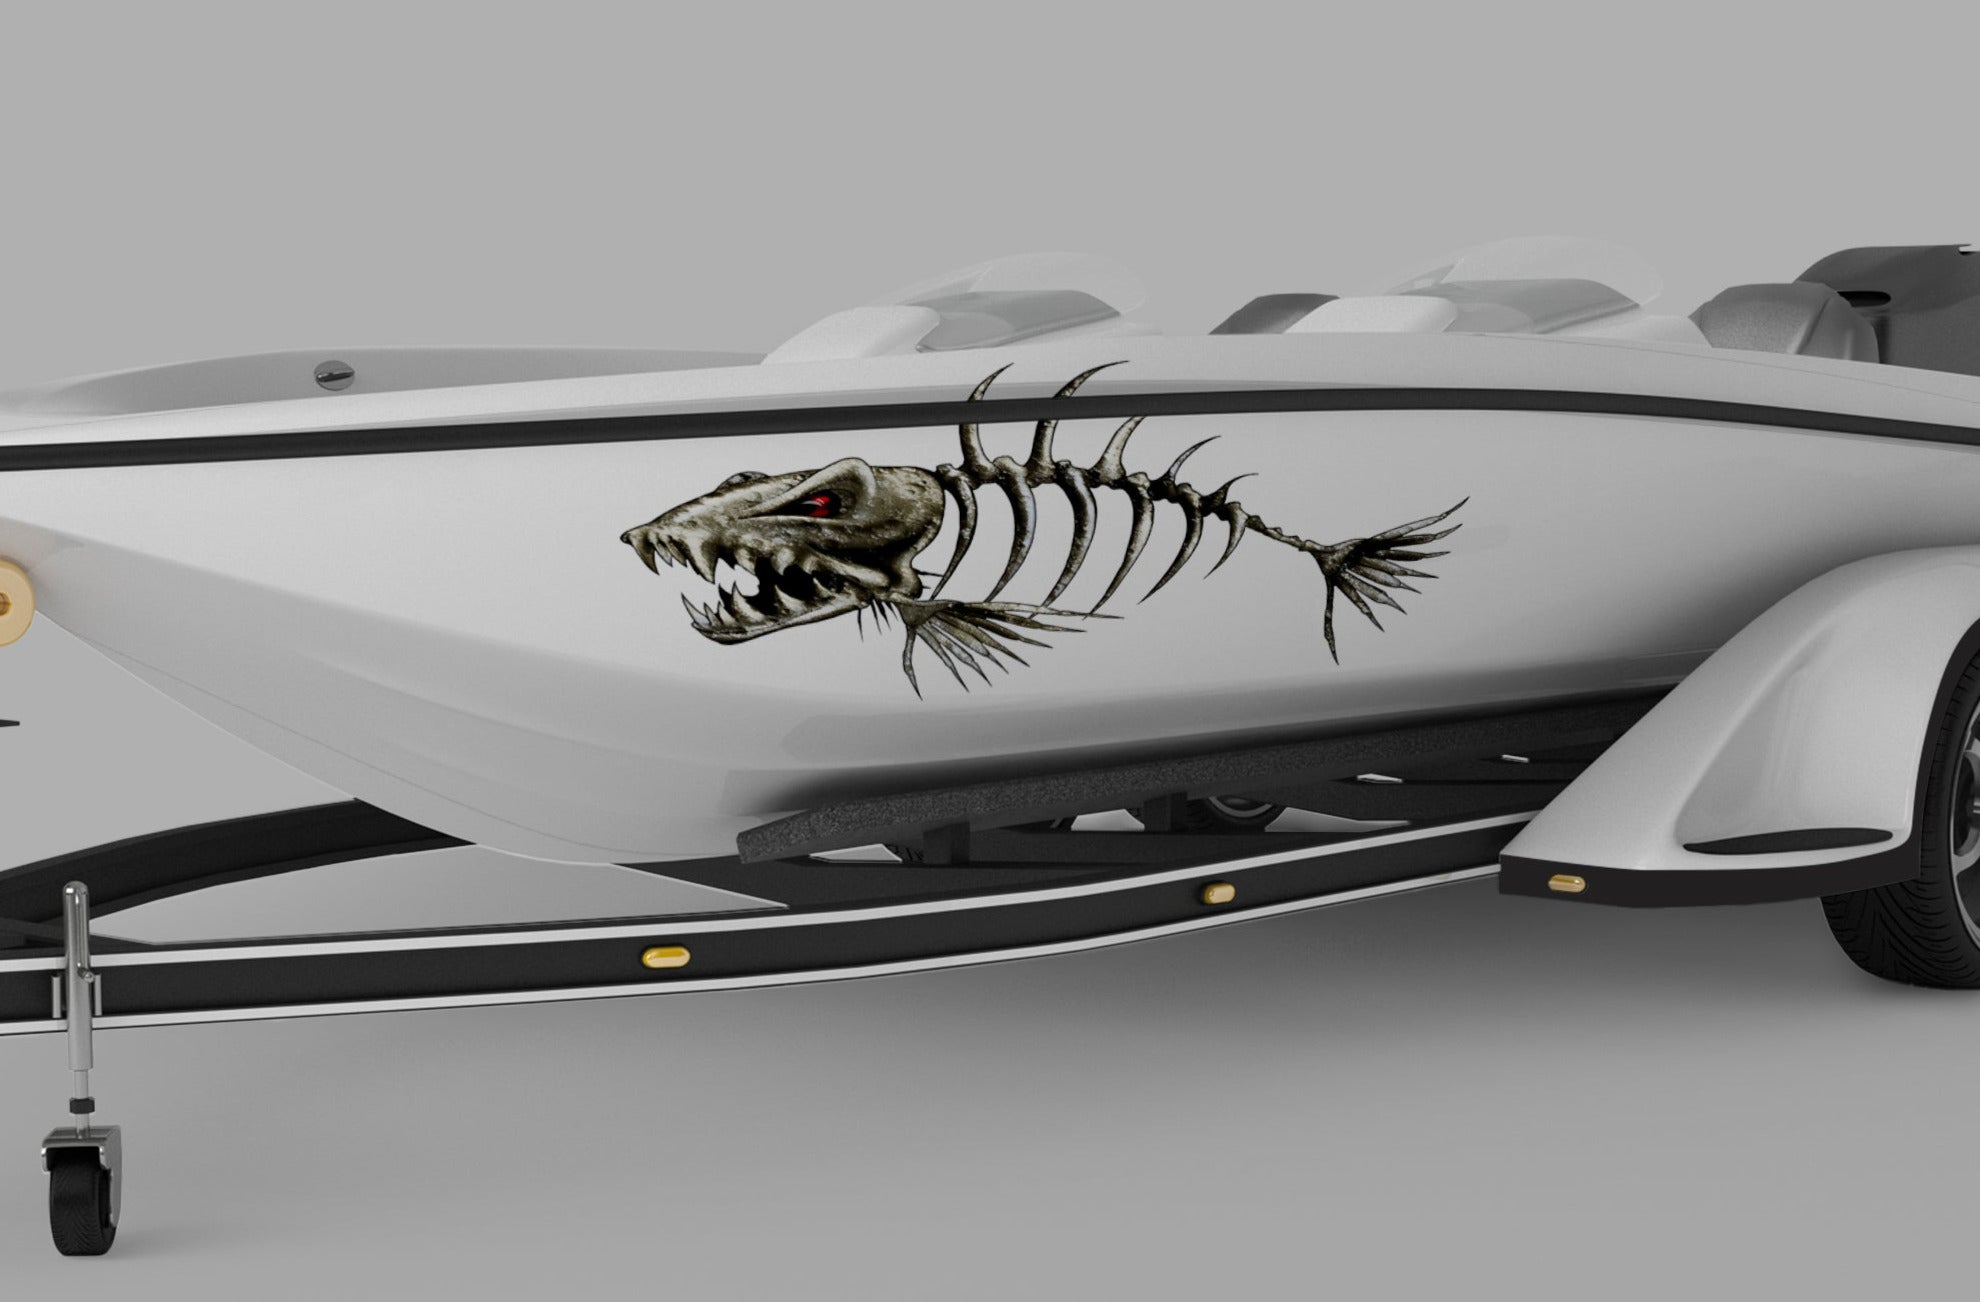 Monster bone fish decal on the side of white boat